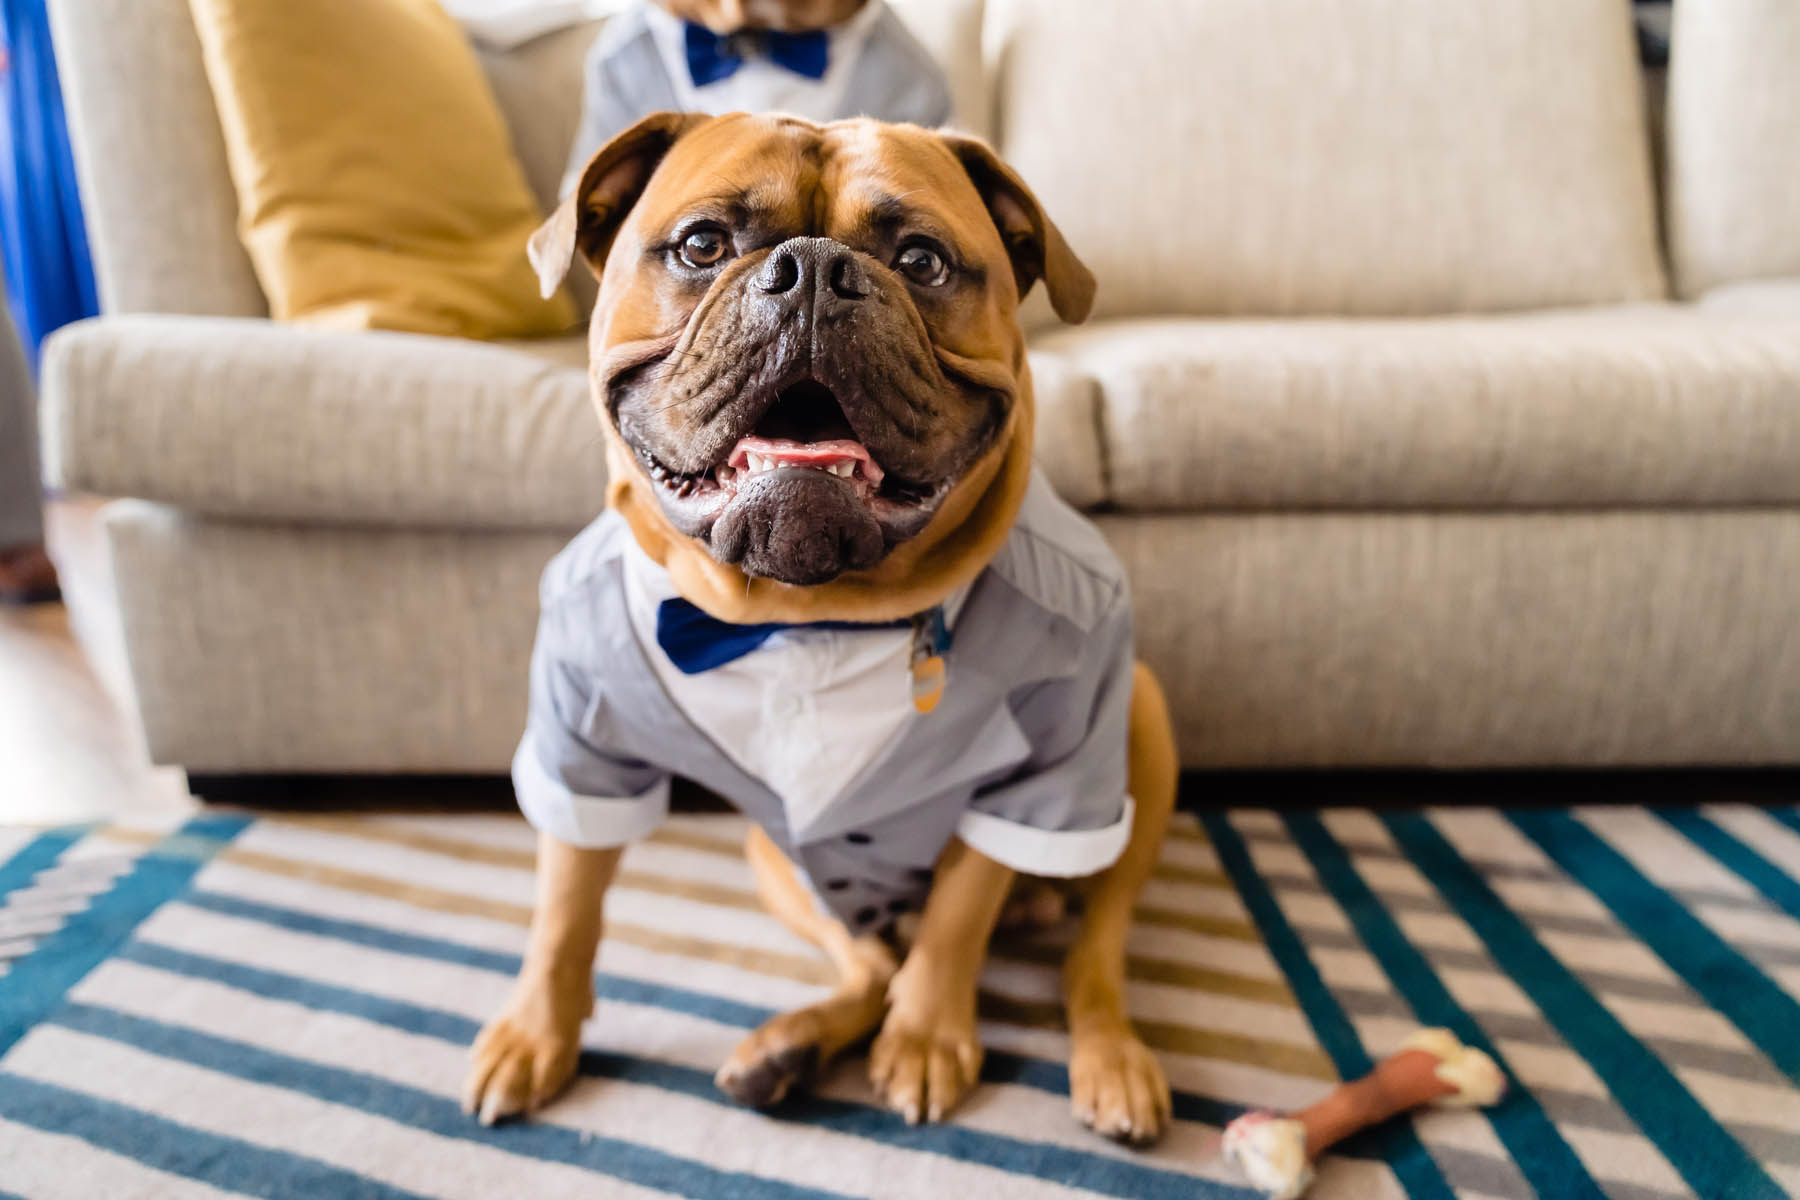 A bulldog in a fitted suit sits in front of a beige couch.